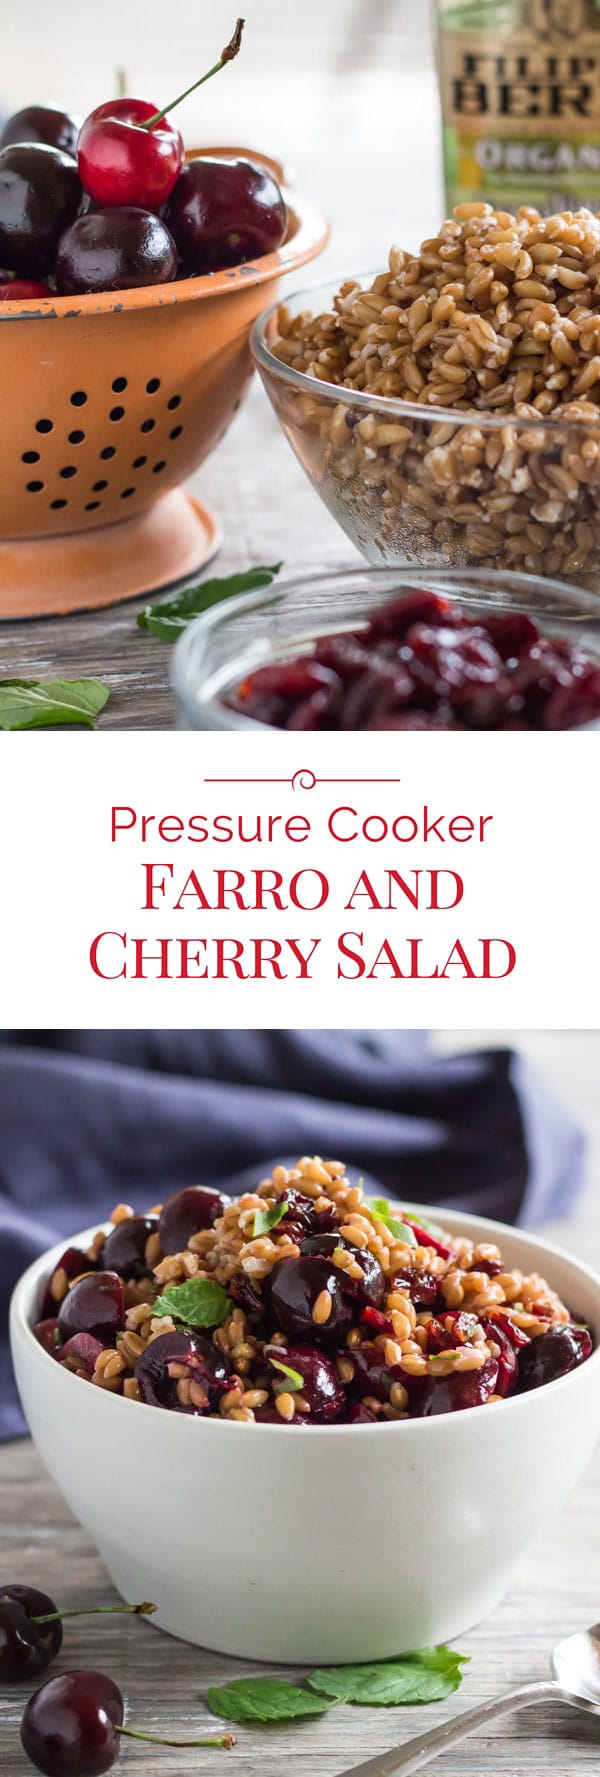 Pressure Cooker Farro and Cherry Salad showcases farro’s nutty chewy texture and the sweet-tart flavor of fresh and dried cherries. Making farro in an Instapot is quick and easy! This recipe for farro salad with cherries is perfect to serve on its own or as a side dish. #pressurecooking #instantpot #farro #saladrecipe via @PressureCook2da